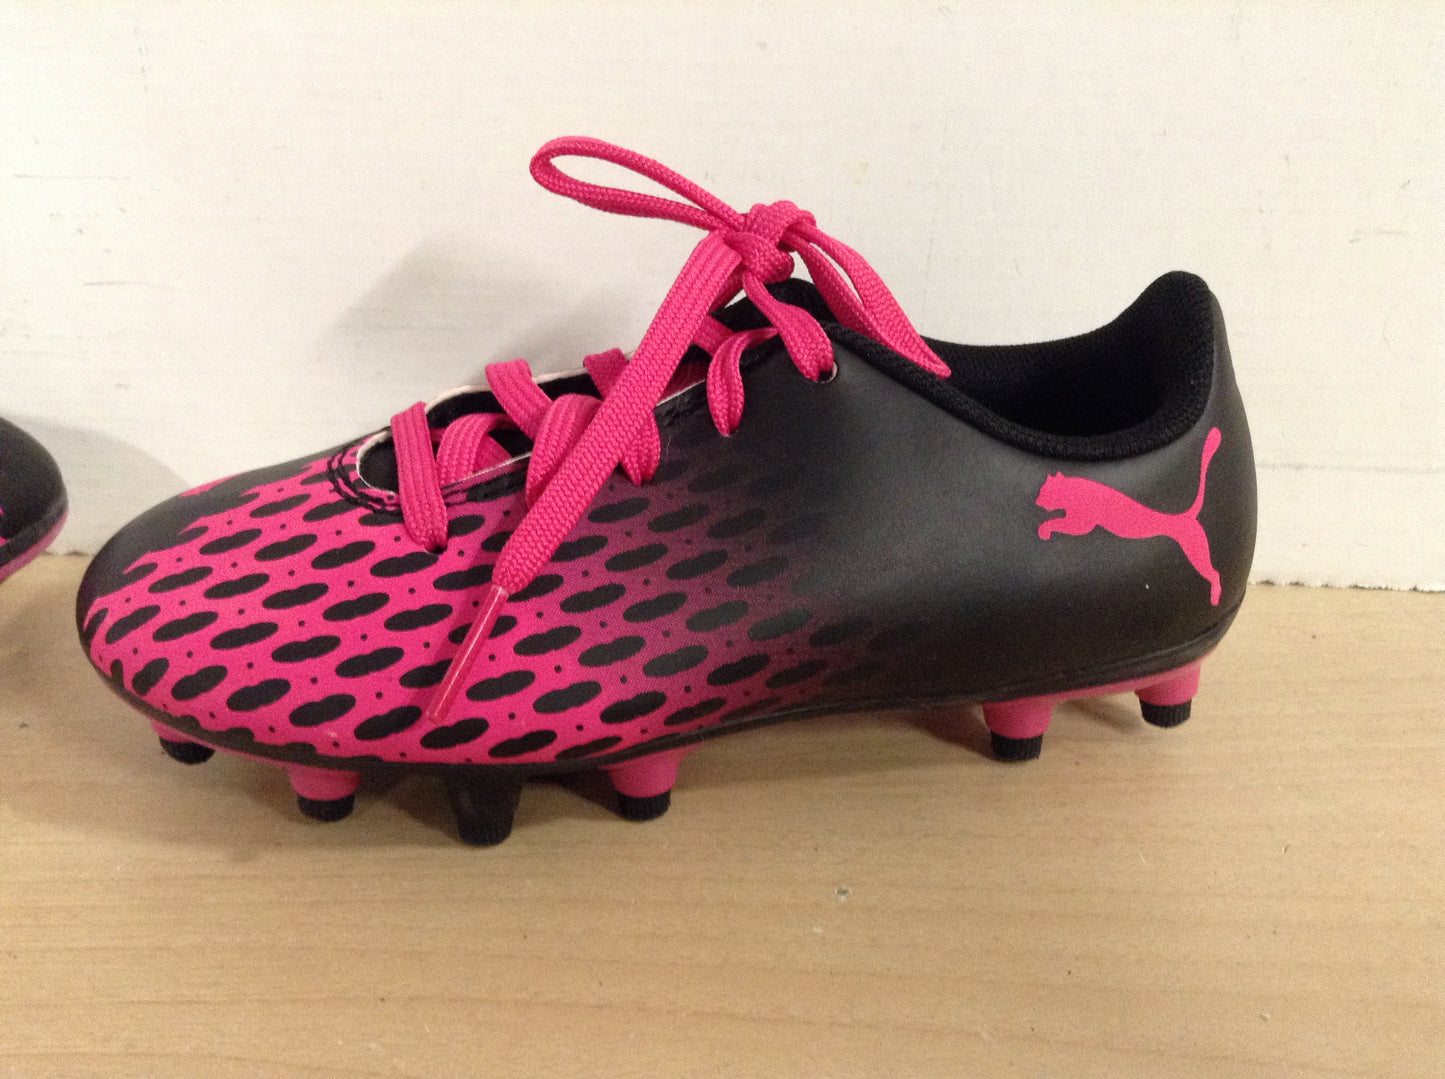 Soccer Shoes Cleats Child Size 10 Toddler Puma Fushia and Black New Demo Model